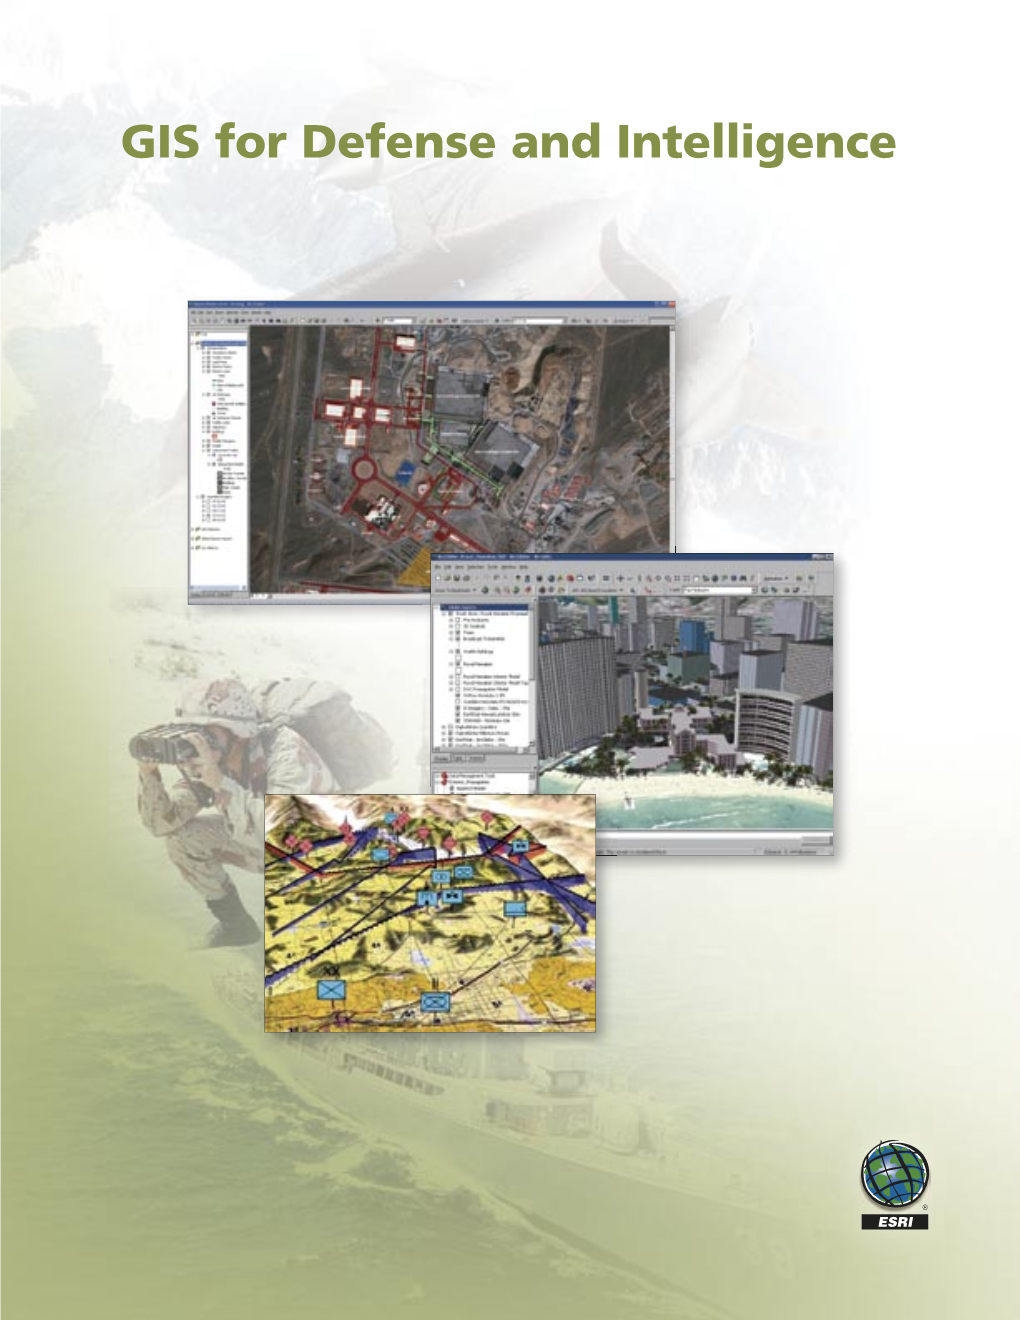 GIS for Defense and Intelligence Introduction